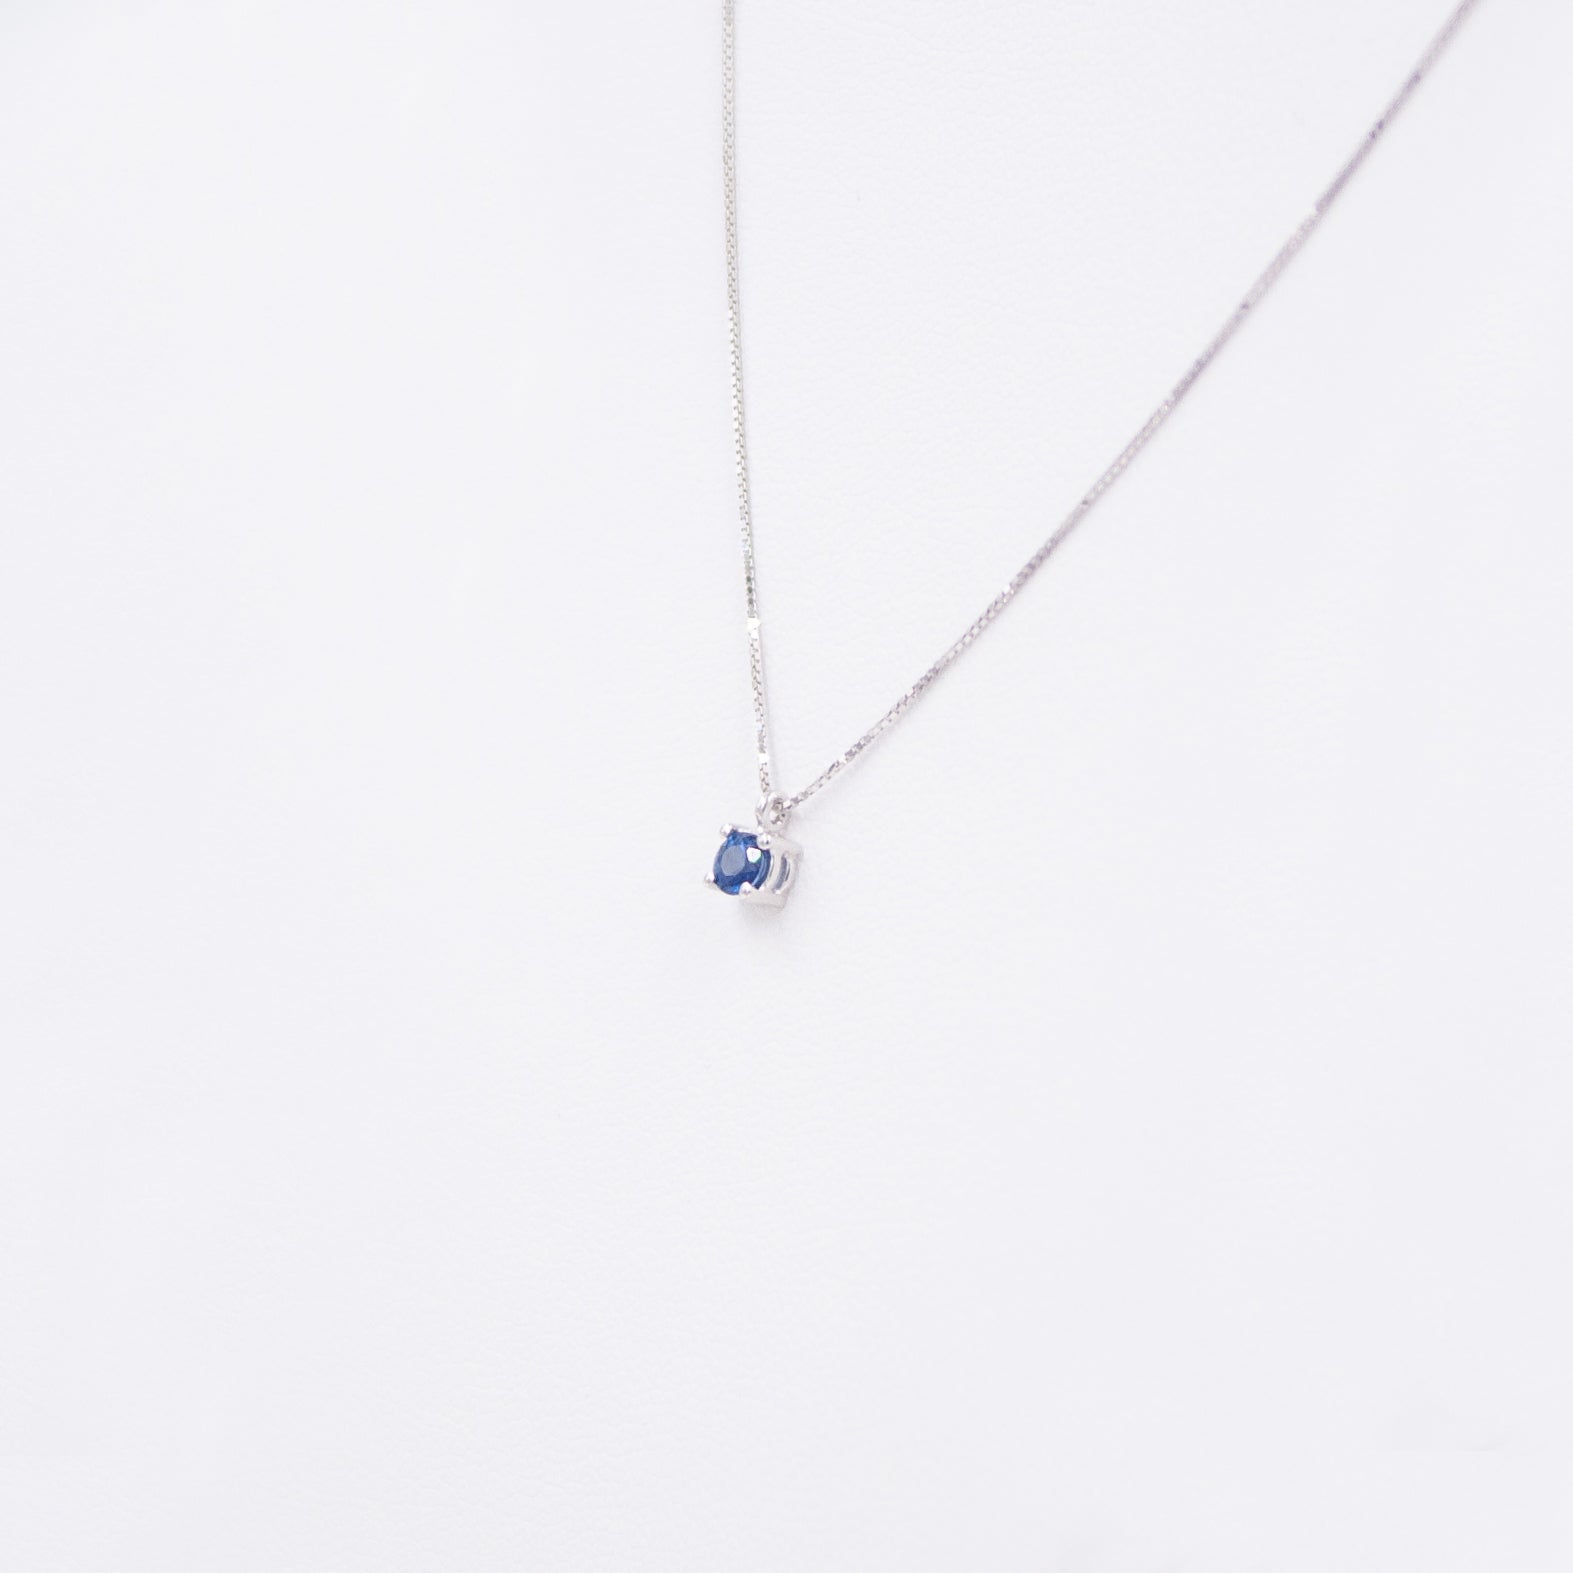 Spotlight Necklace with Sapphire